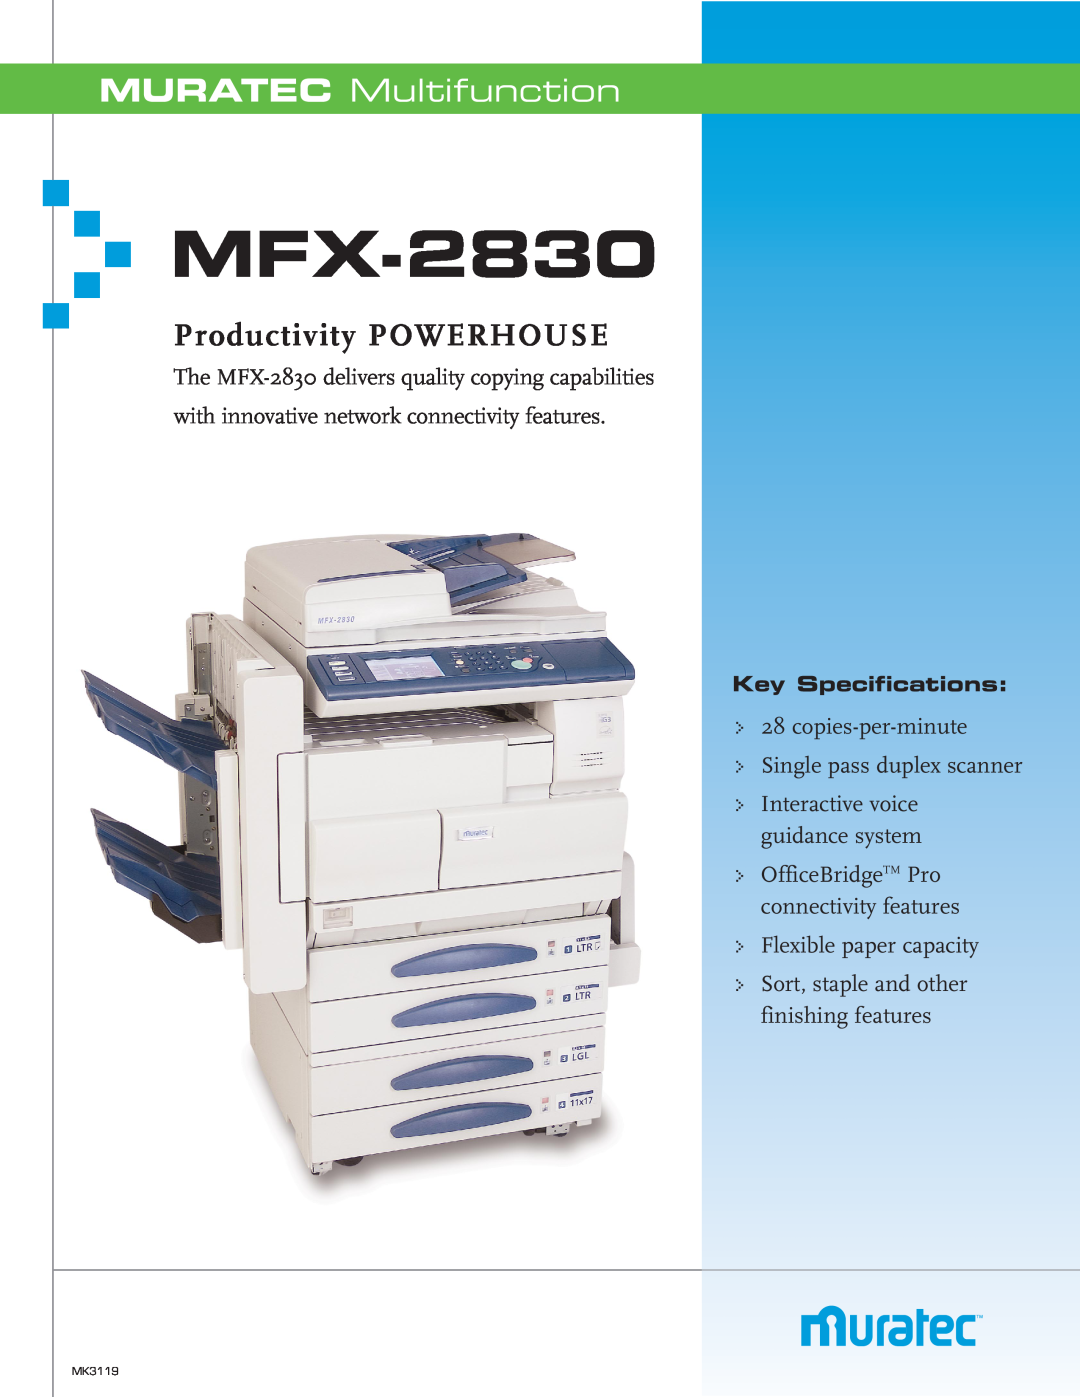 Muratec MK3119 specifications MURATEC Multifunction, MFXProductivity POWERHOUSE-2830, Key Specifications 